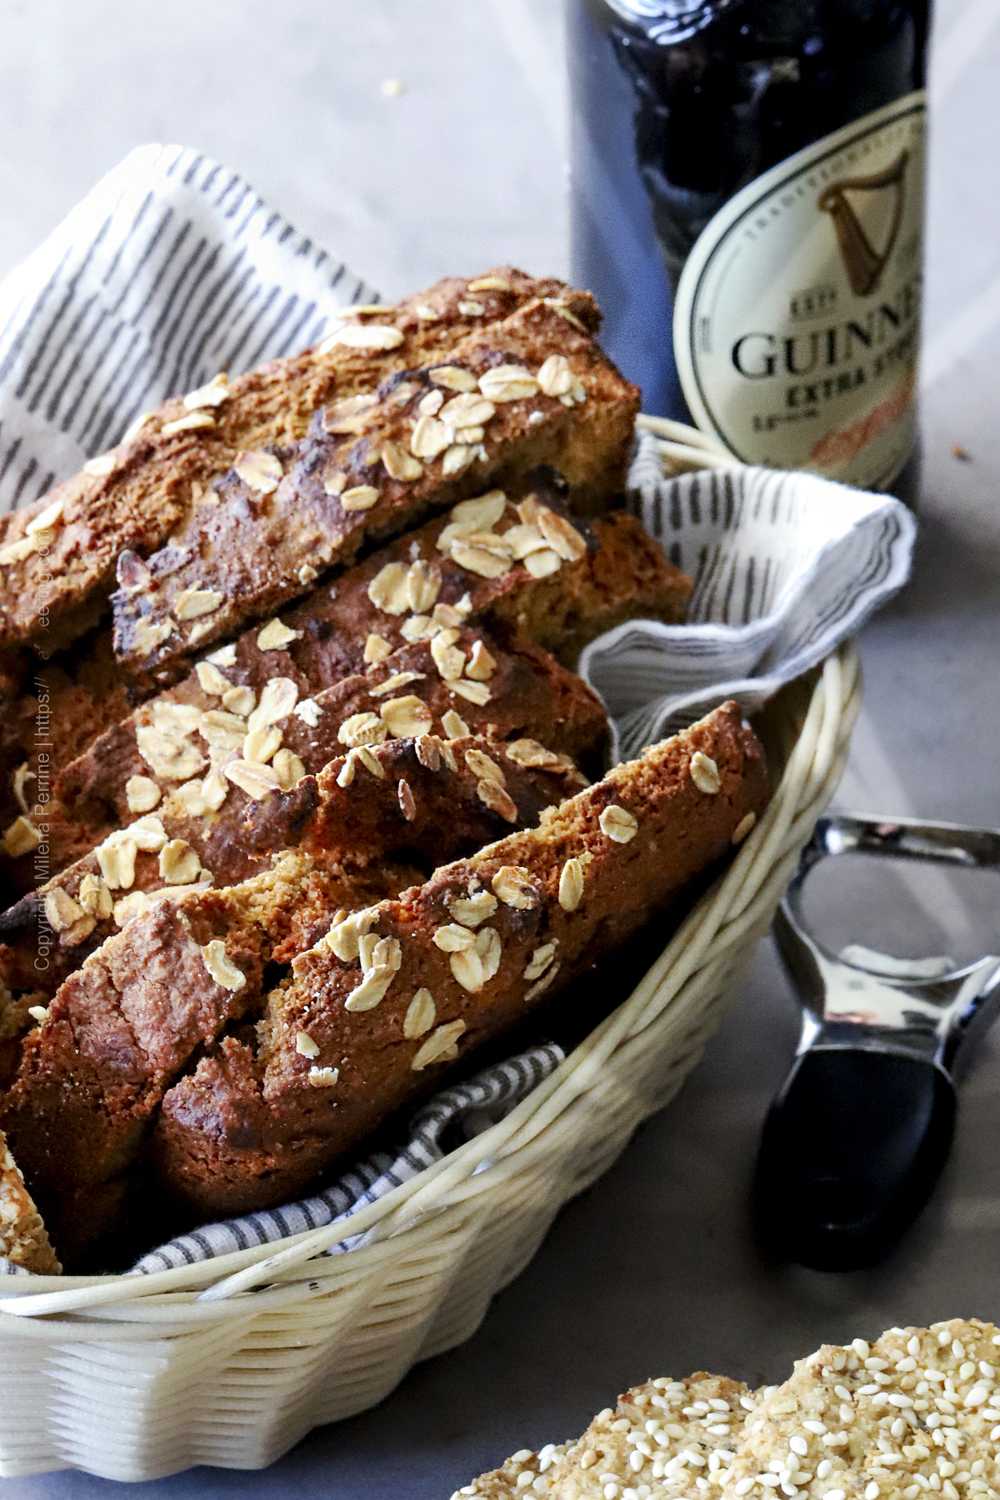 Brown Bread with Guinness & Oats